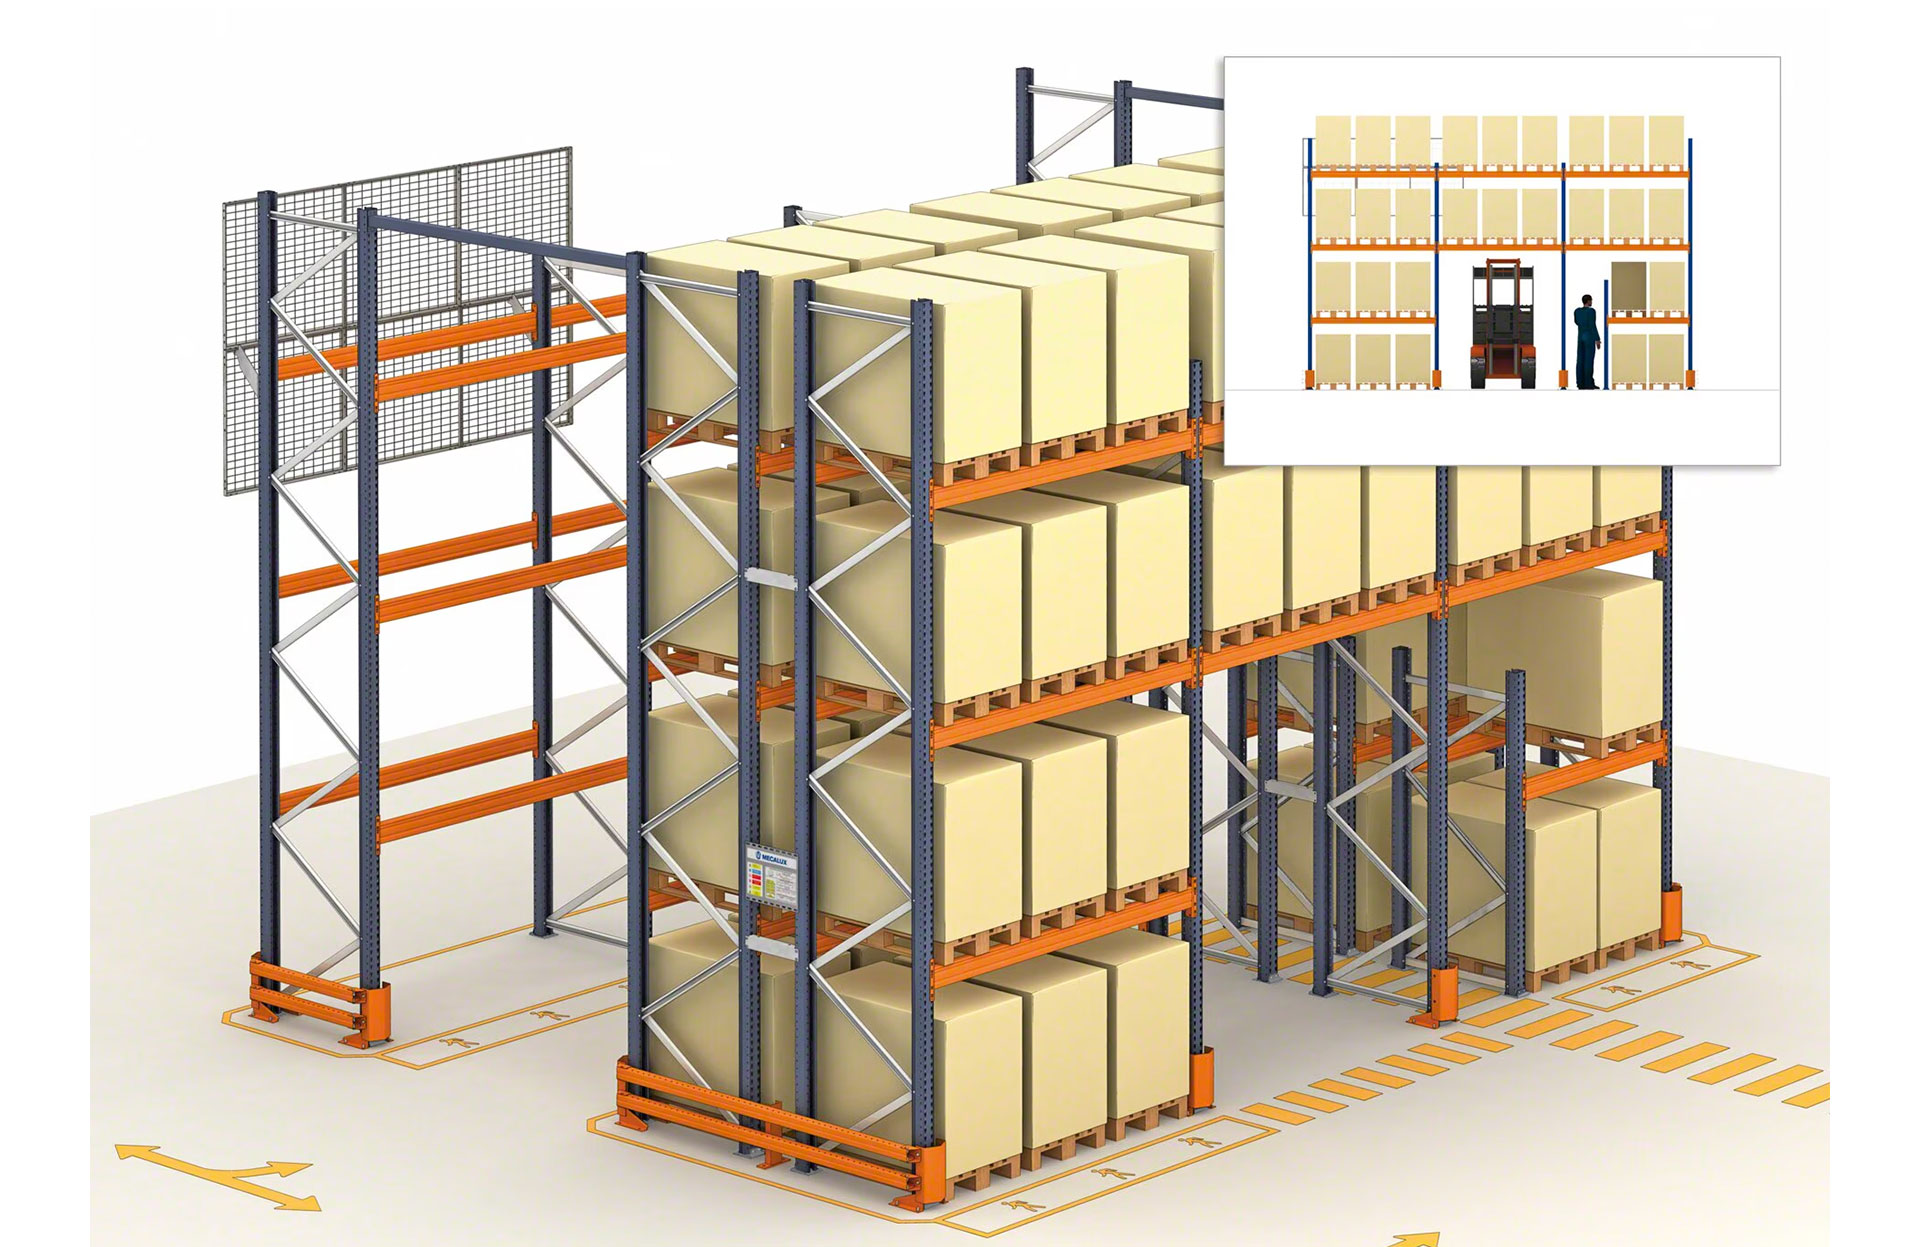 Safety passageways allow for operator and forklift traffic under the pallet racking